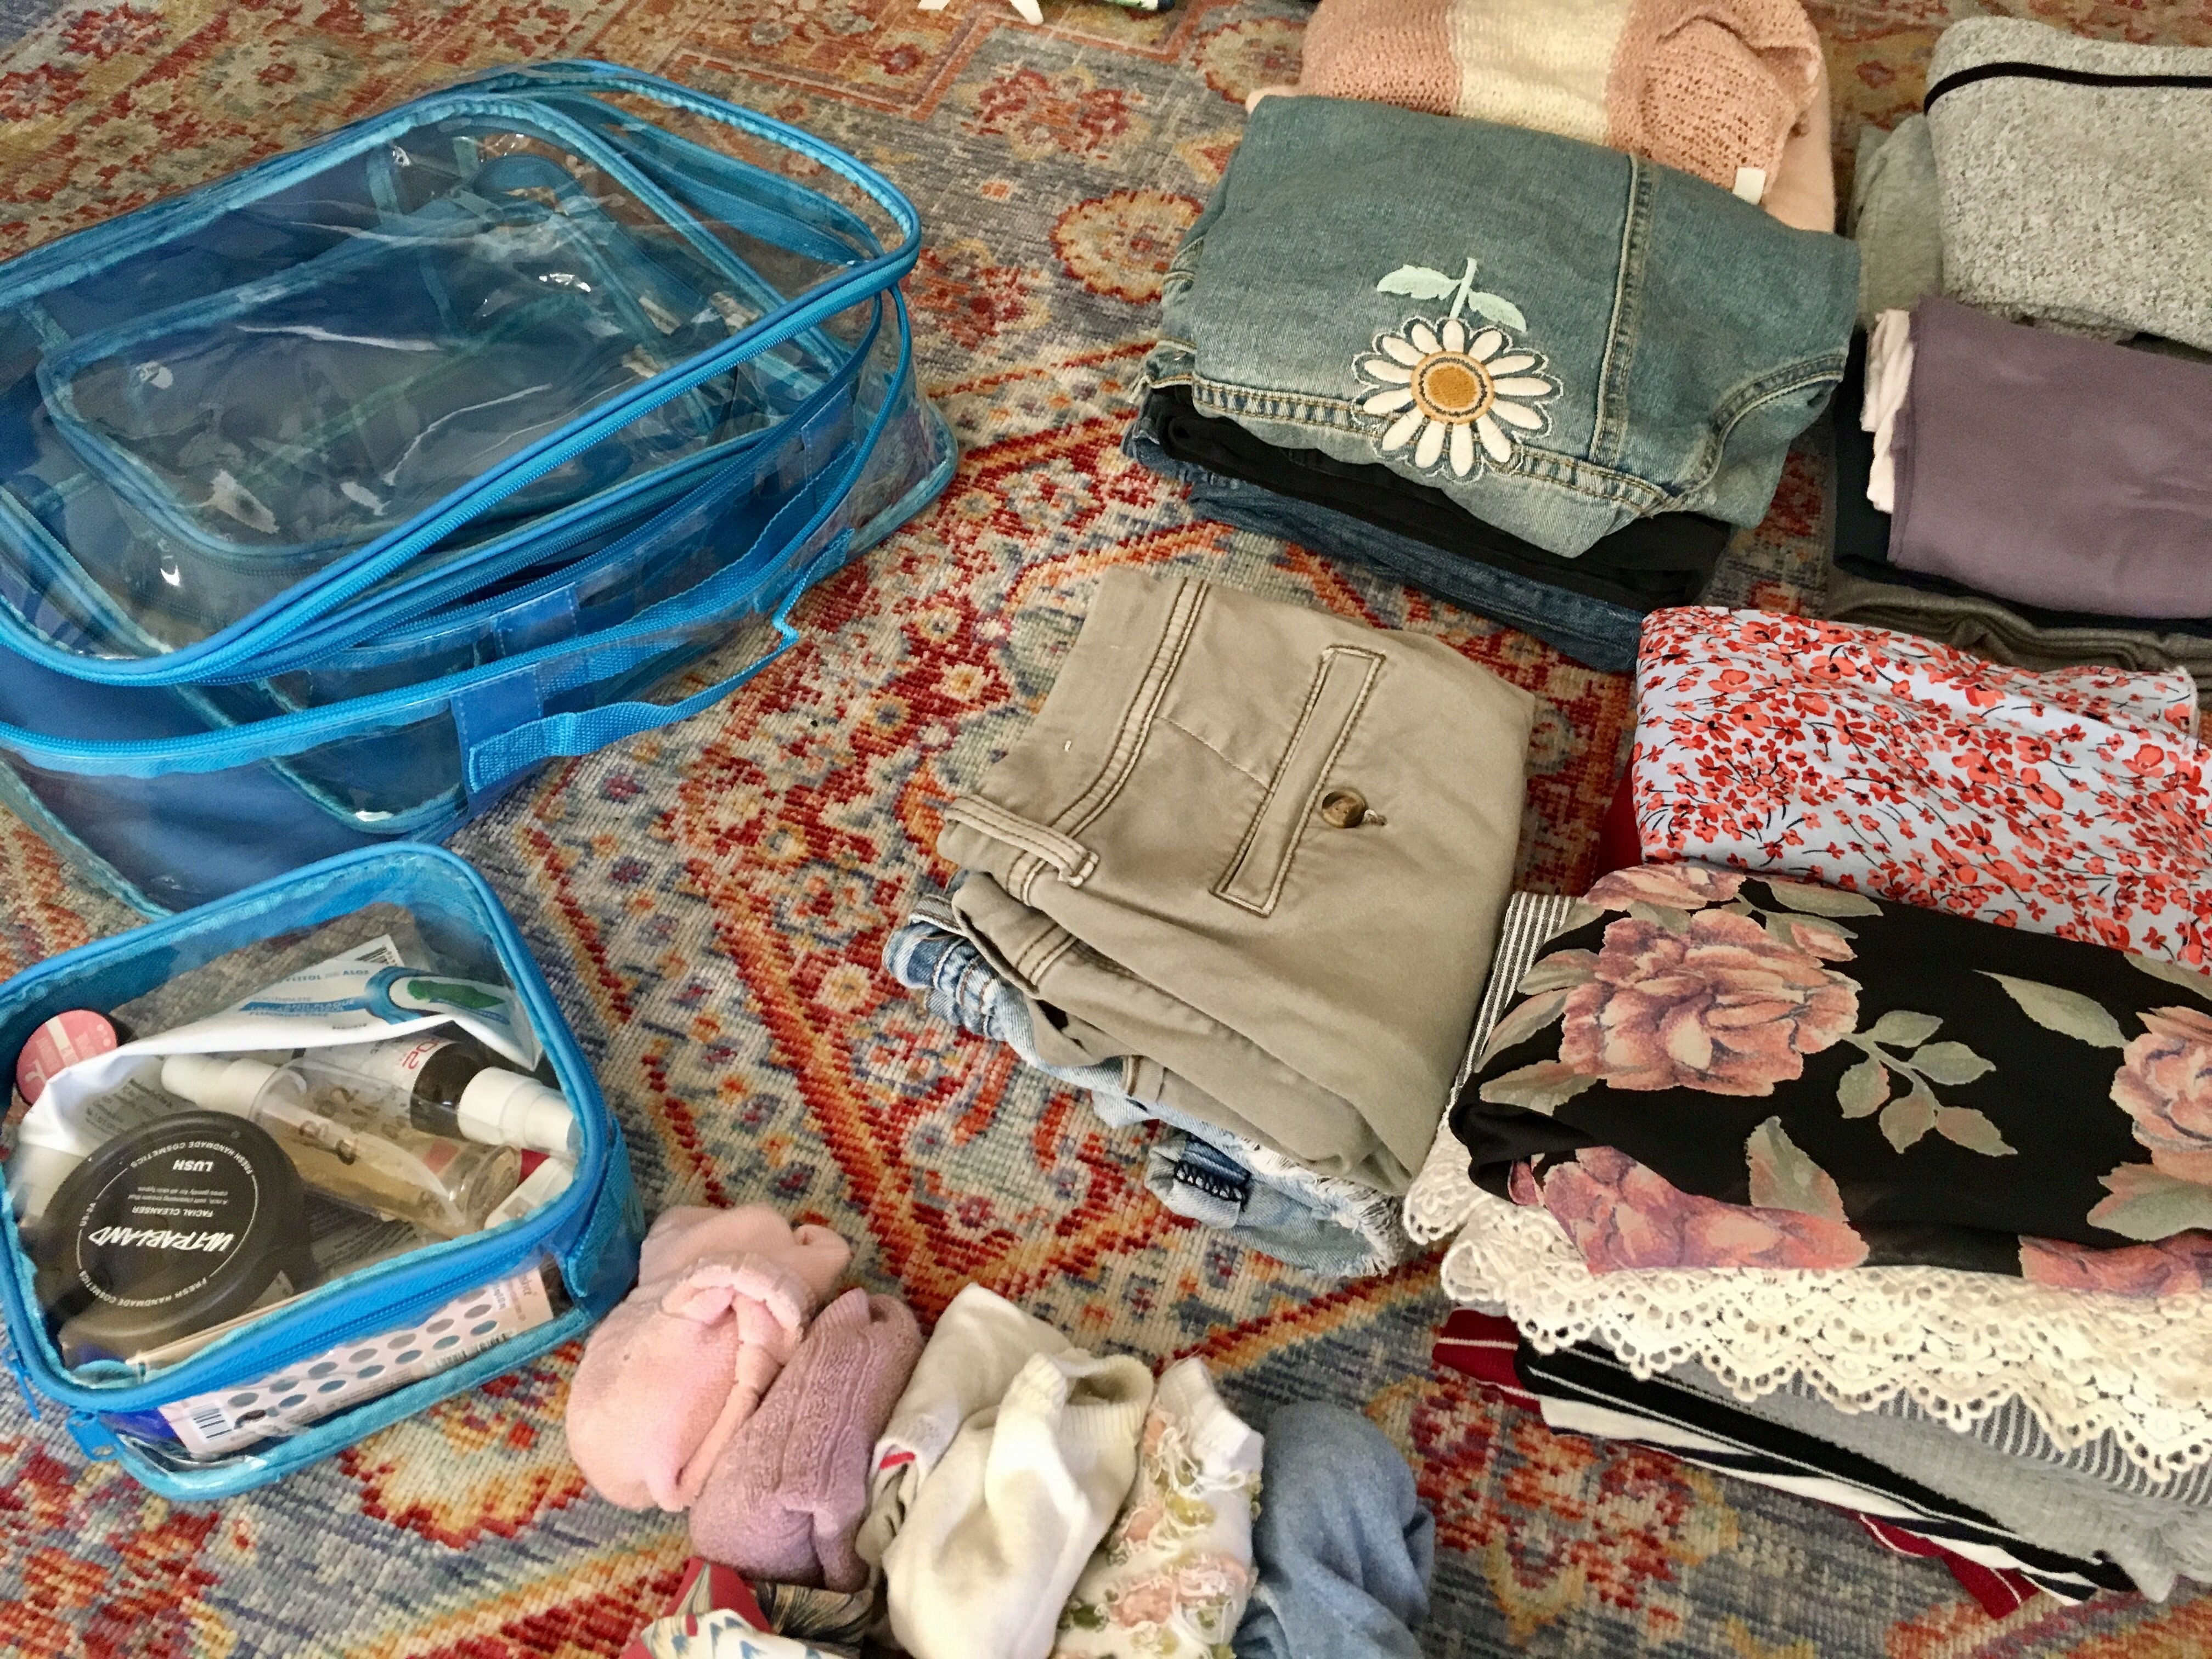 Organizing clothes in blue packing cubes for Summer trip